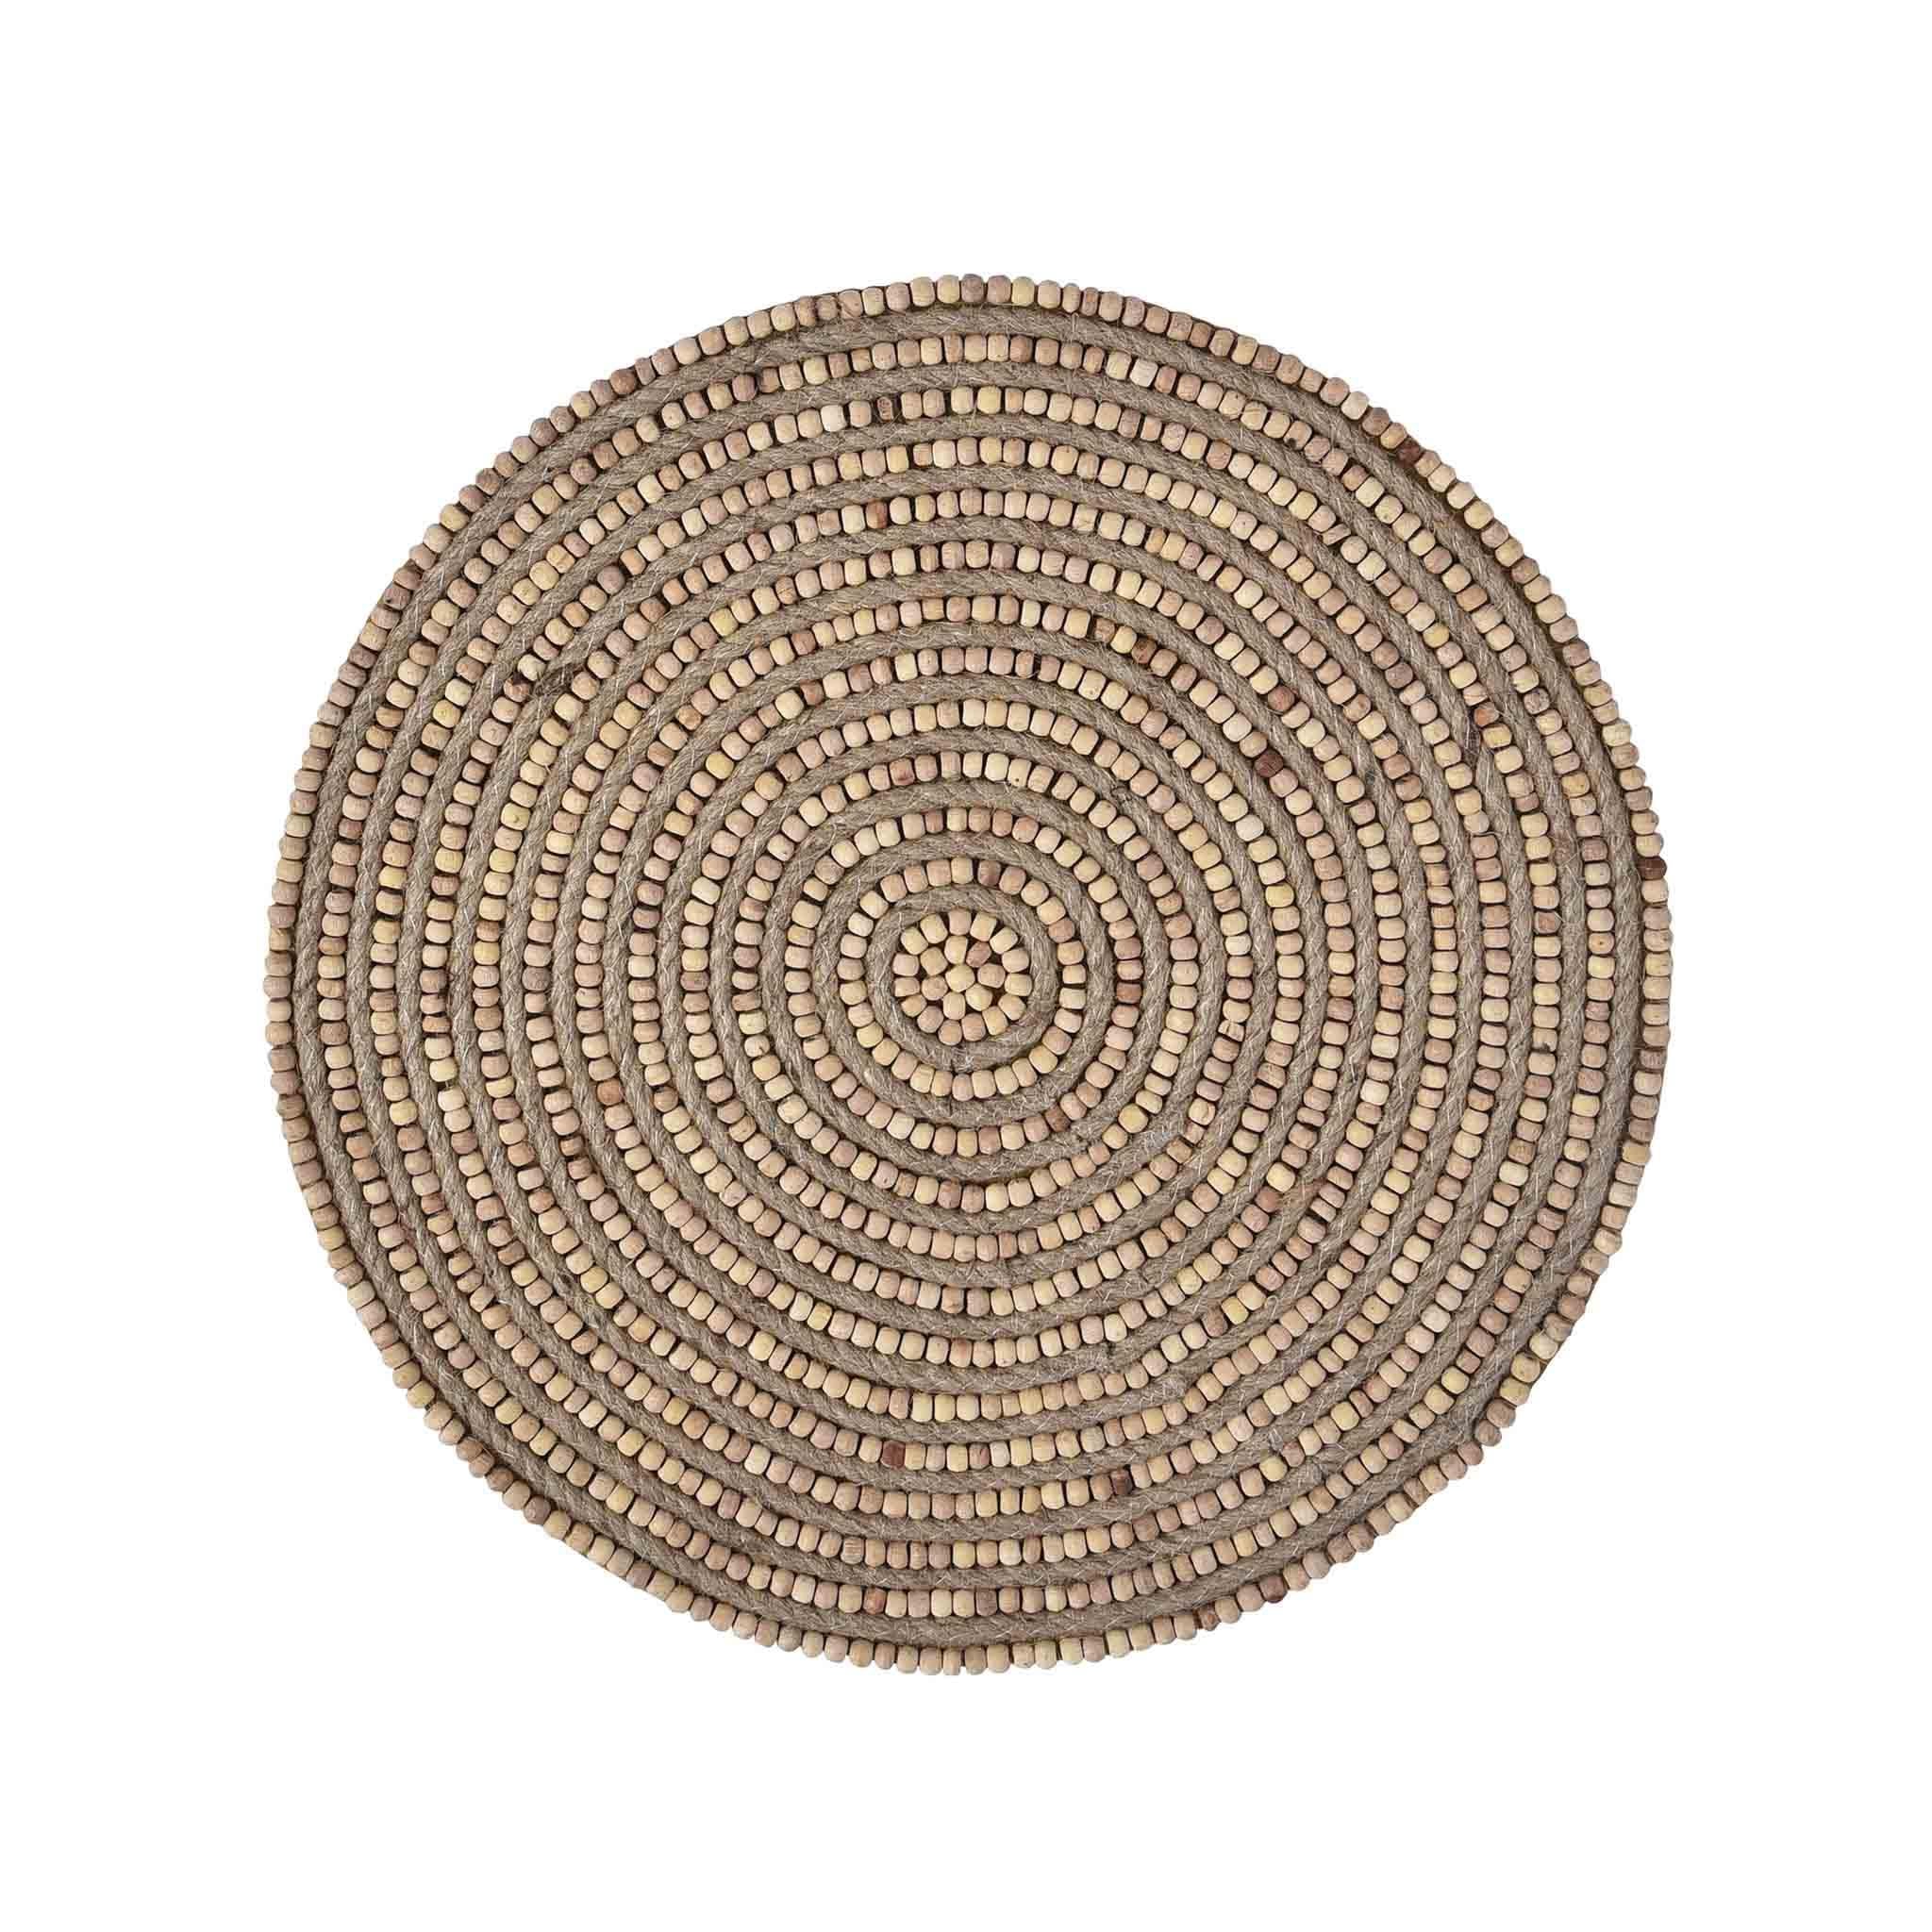 Jute & Wooden Beads Embroidered Placemat<br>Color: Natural<br>Size: 14" Round<br>Set of 2 - Trunkin' USA